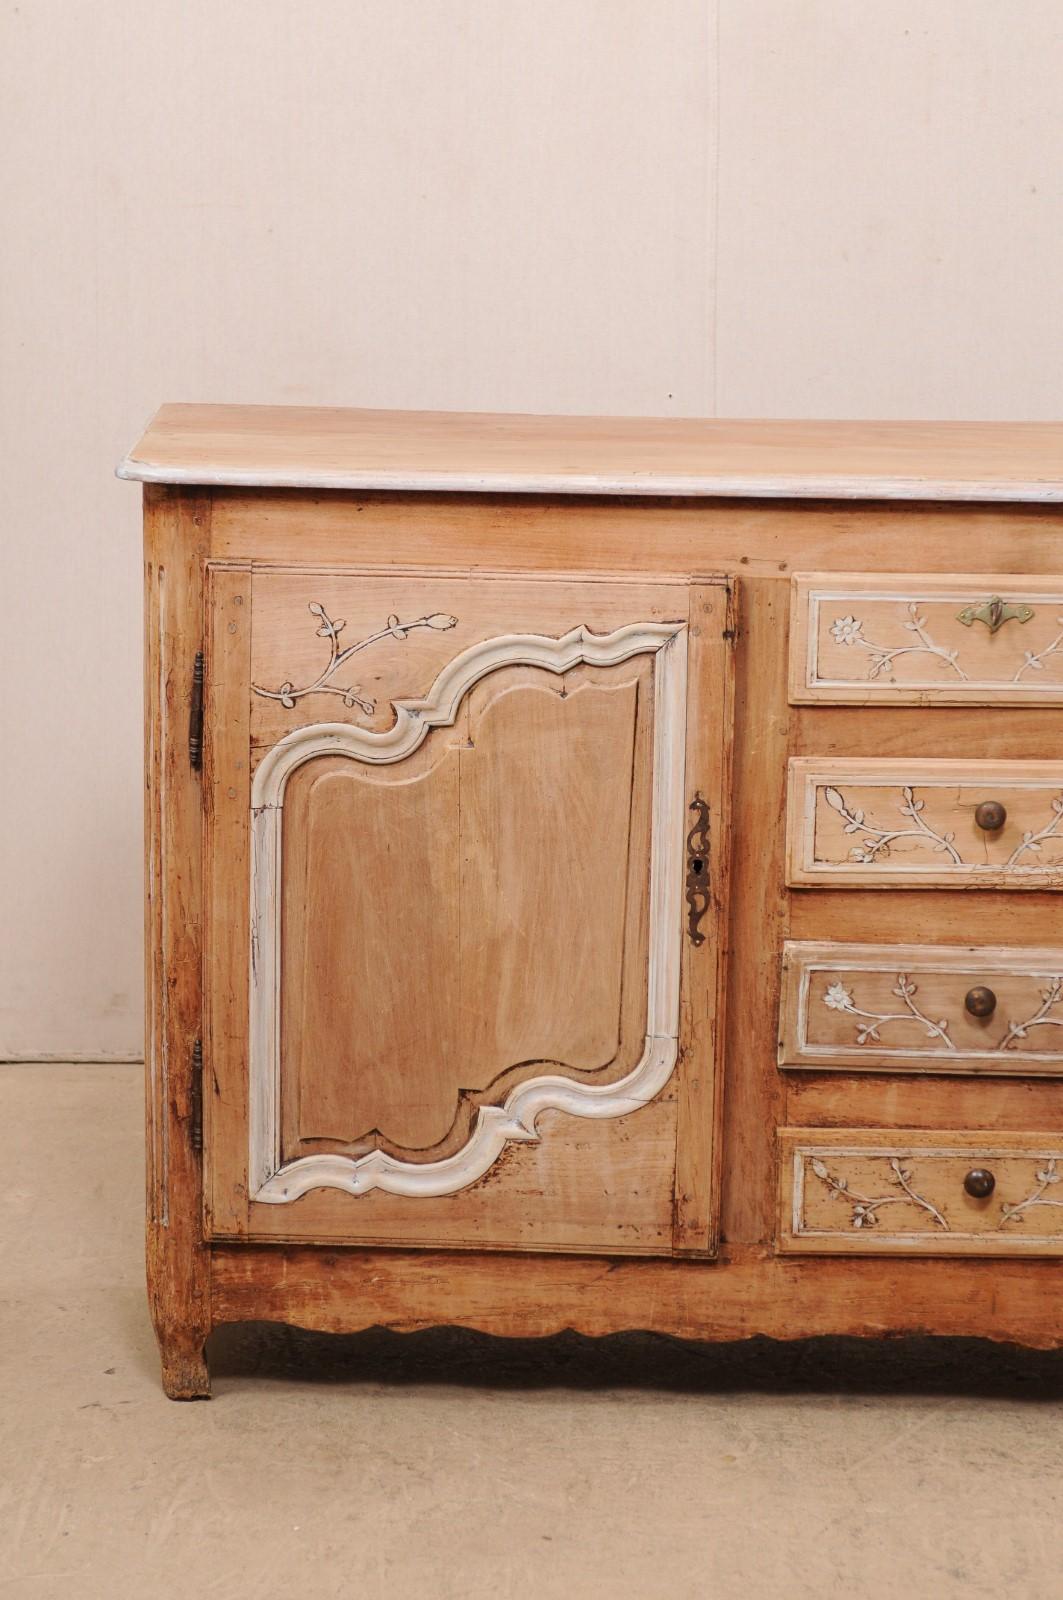 Bleached Antique French Sideboard Cabinet with Delicate Floral Carvings & Scalloped Skirt